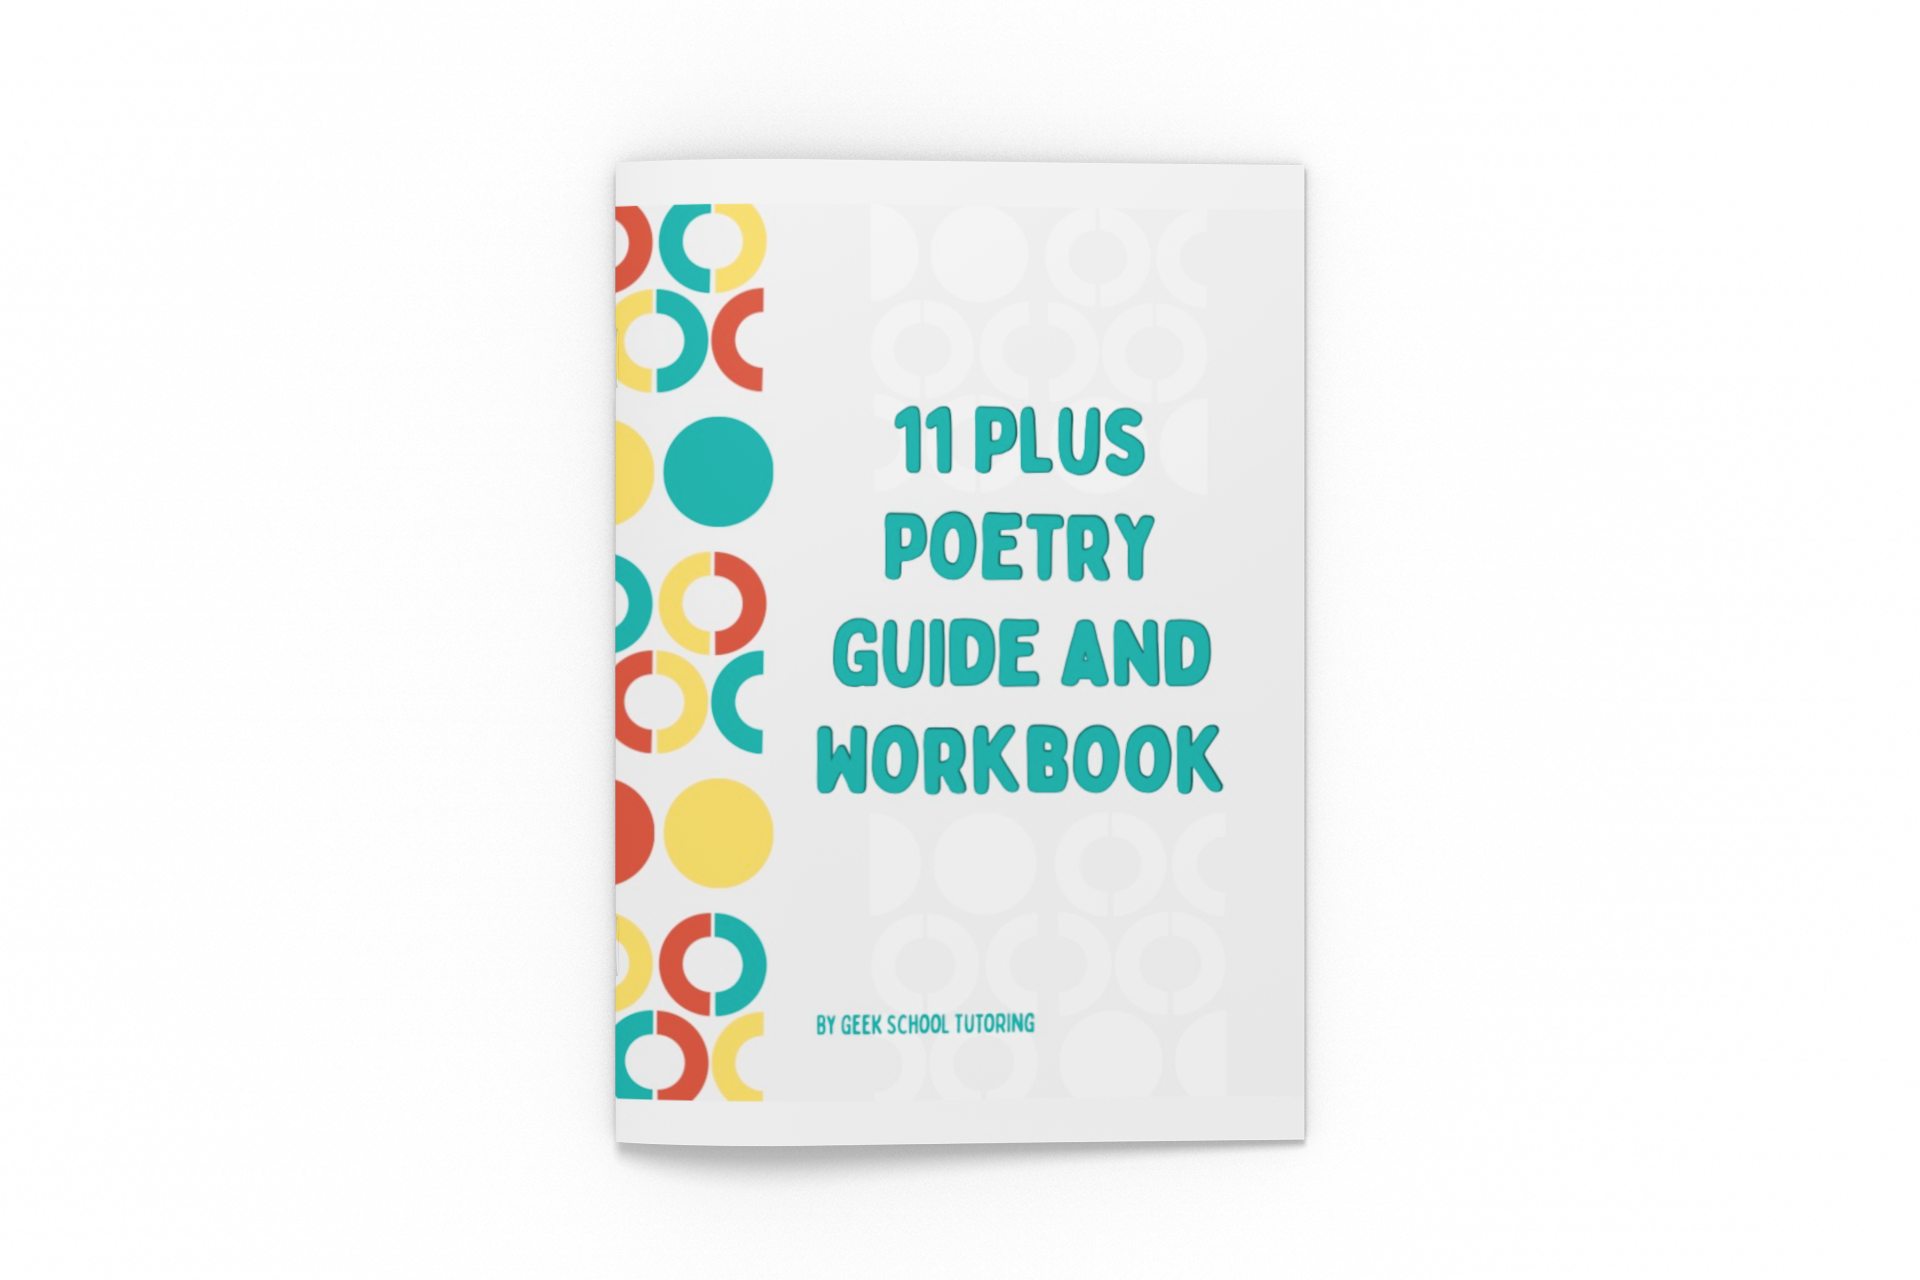 11 Plus Poetry Guide and Workbook